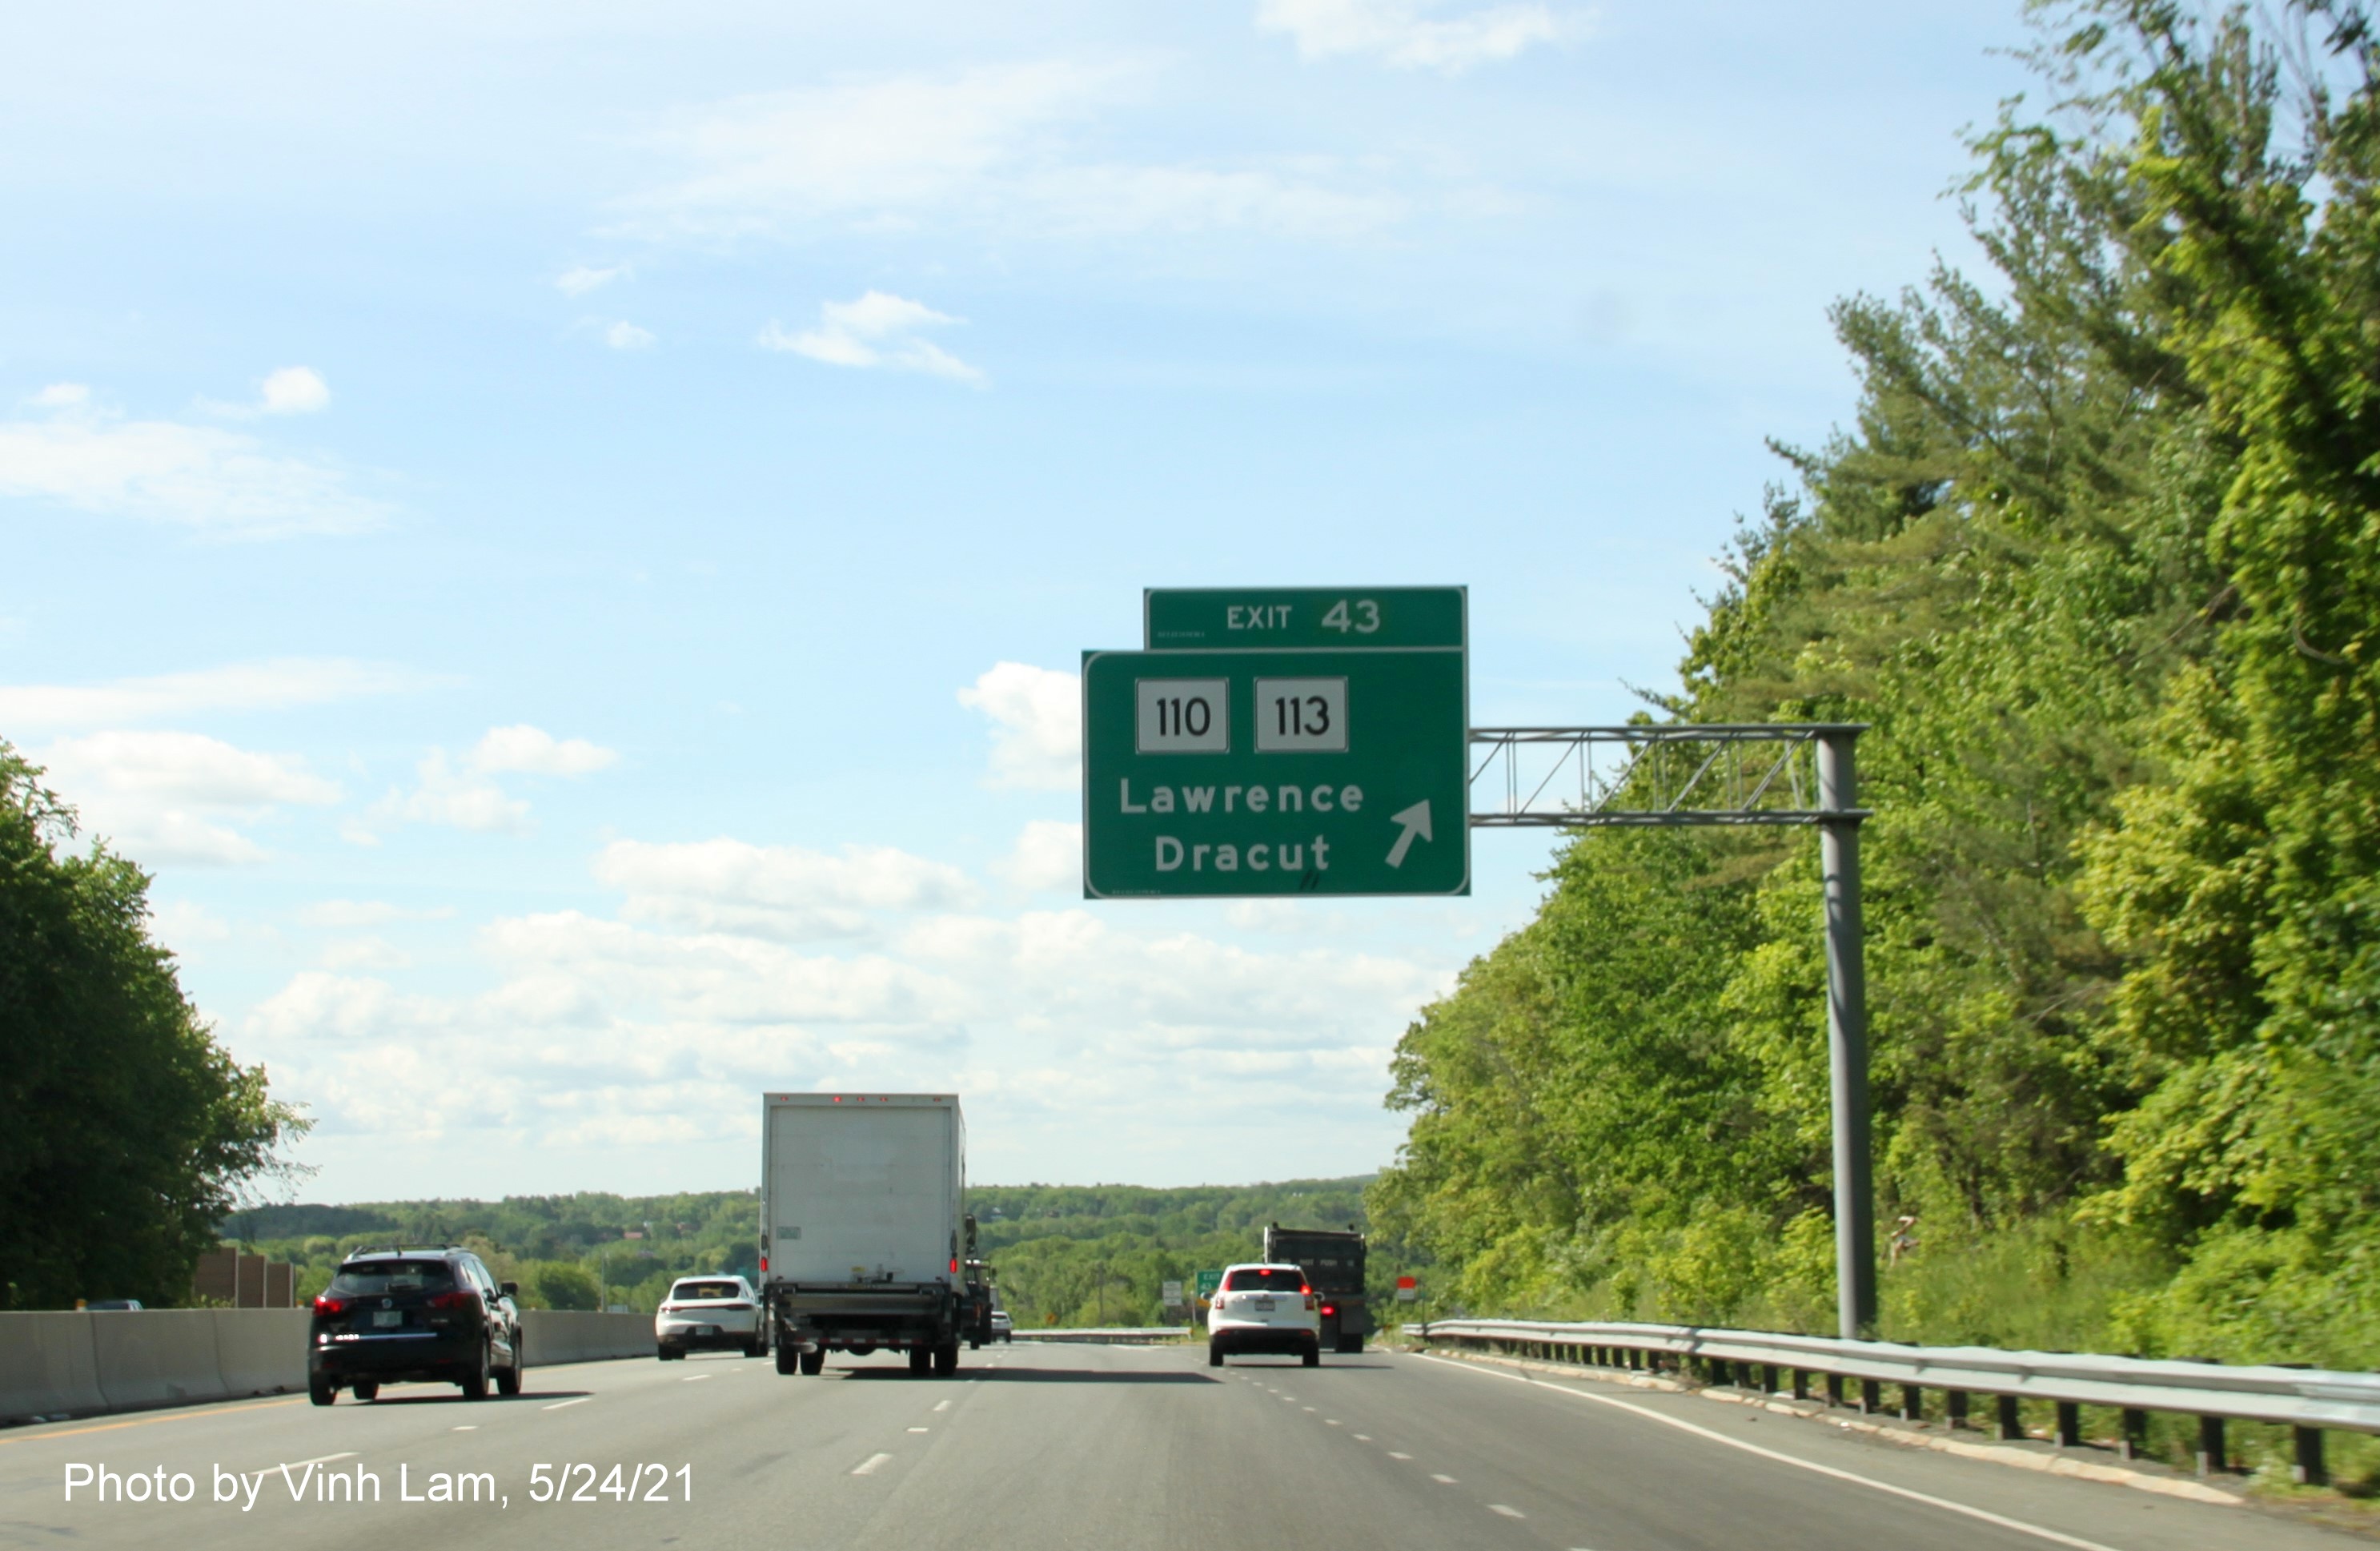 Image of overhead ramp sign for MA 110/113 exit with new milepost based exit number on I-93 South in Andover, by Vinh Lam, May 2021